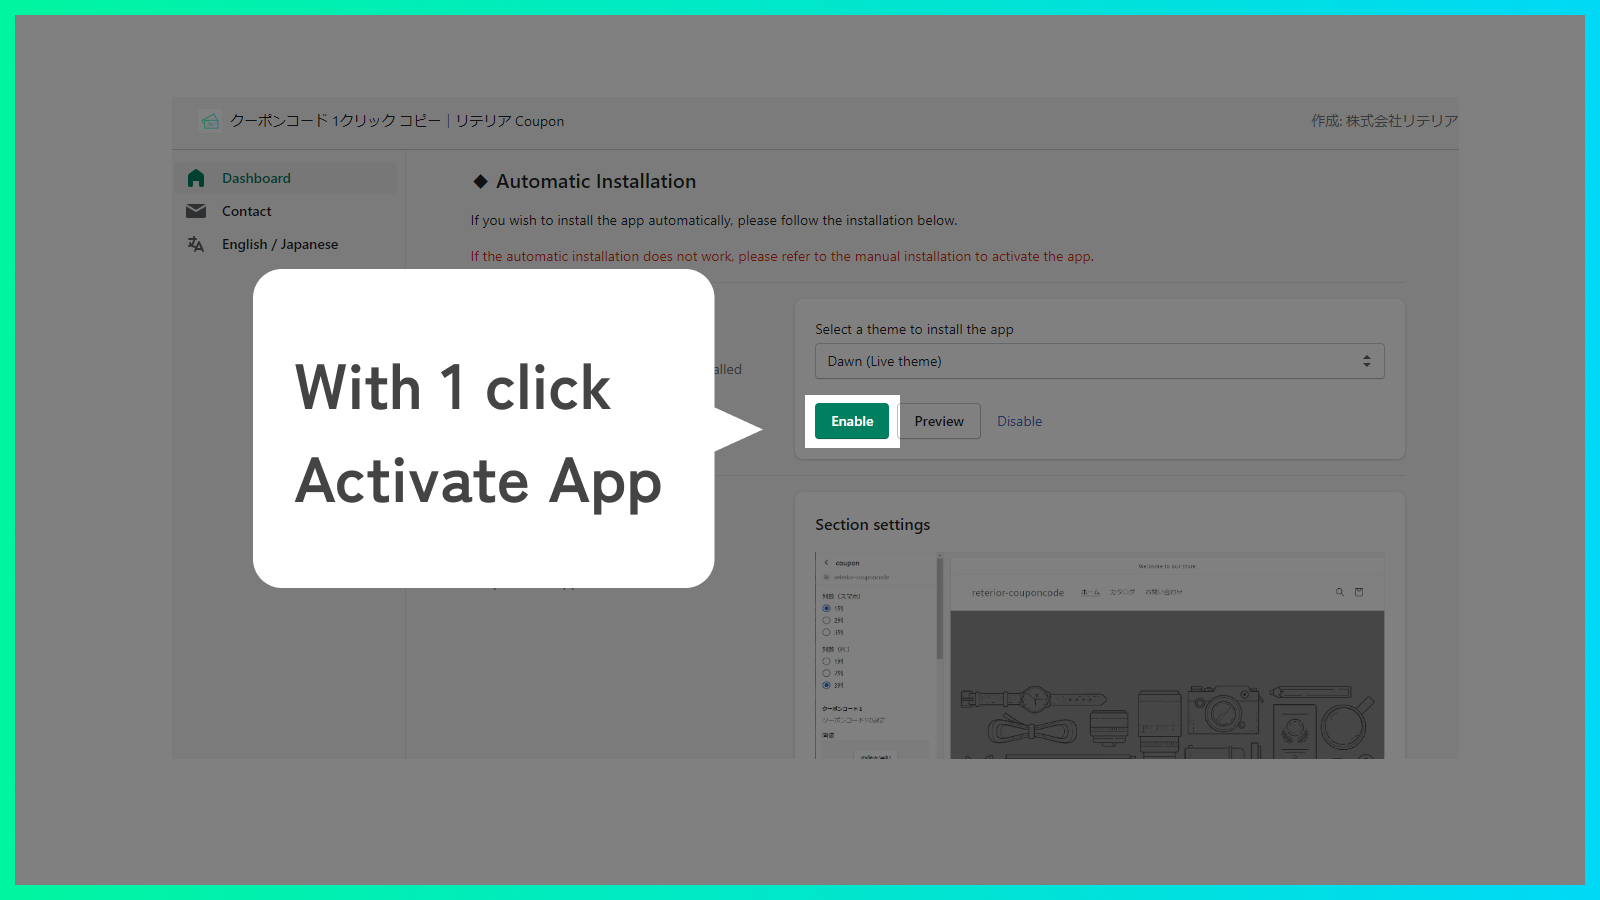 Activate the application with 1 click